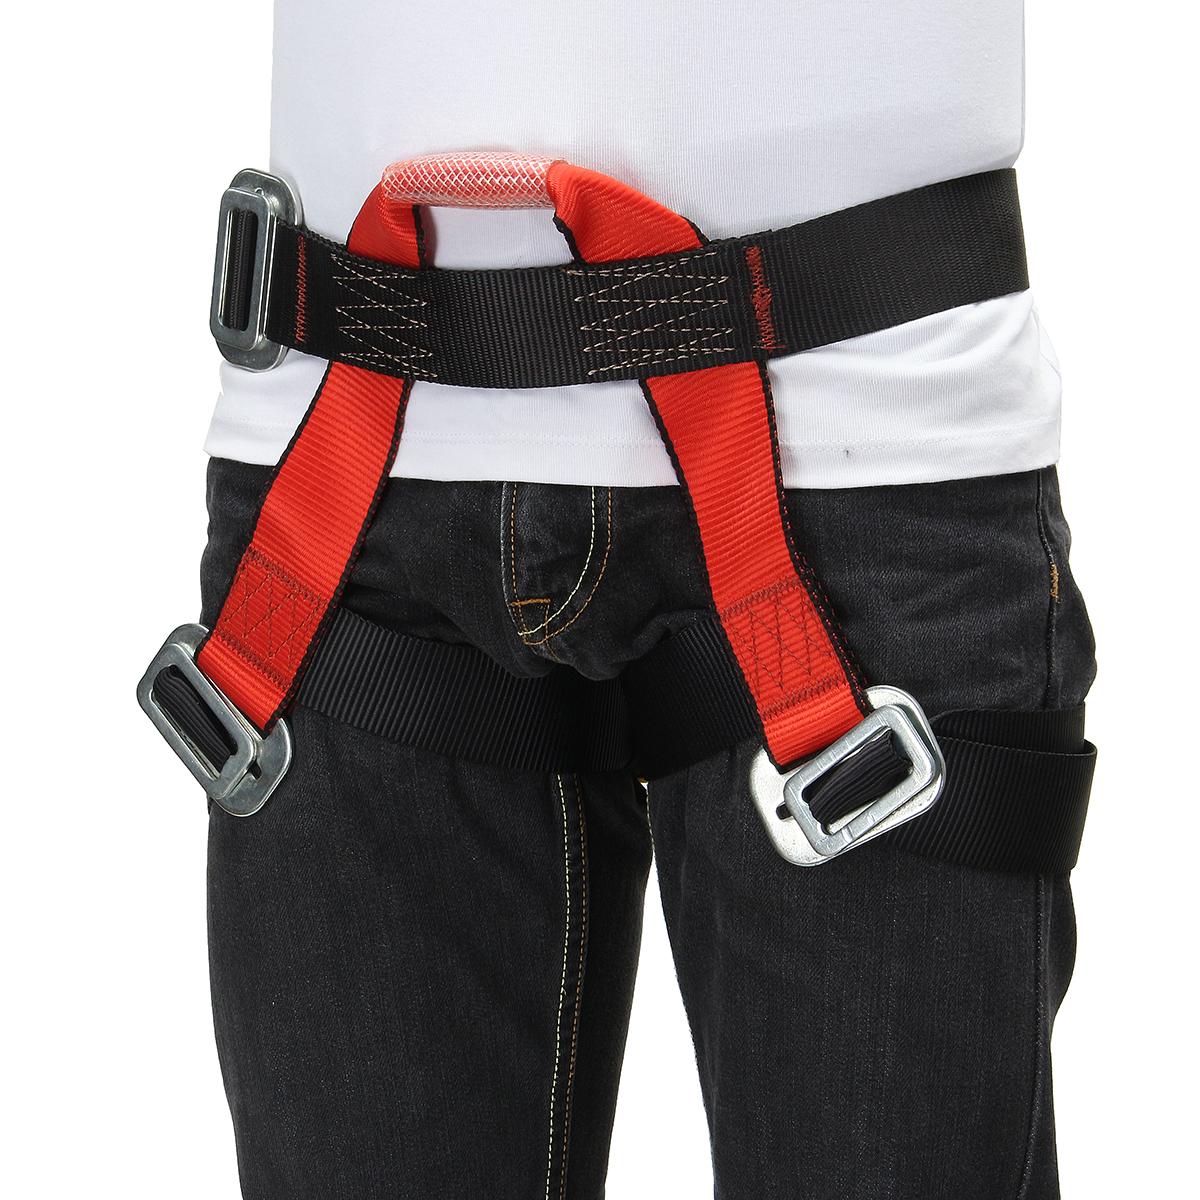 Outdoor-Mountain-Rock-Climbing-Rappelling-Harness-Bust-Belt-Rescue-Safety-Seat-Sitting-Strap-1130415-8